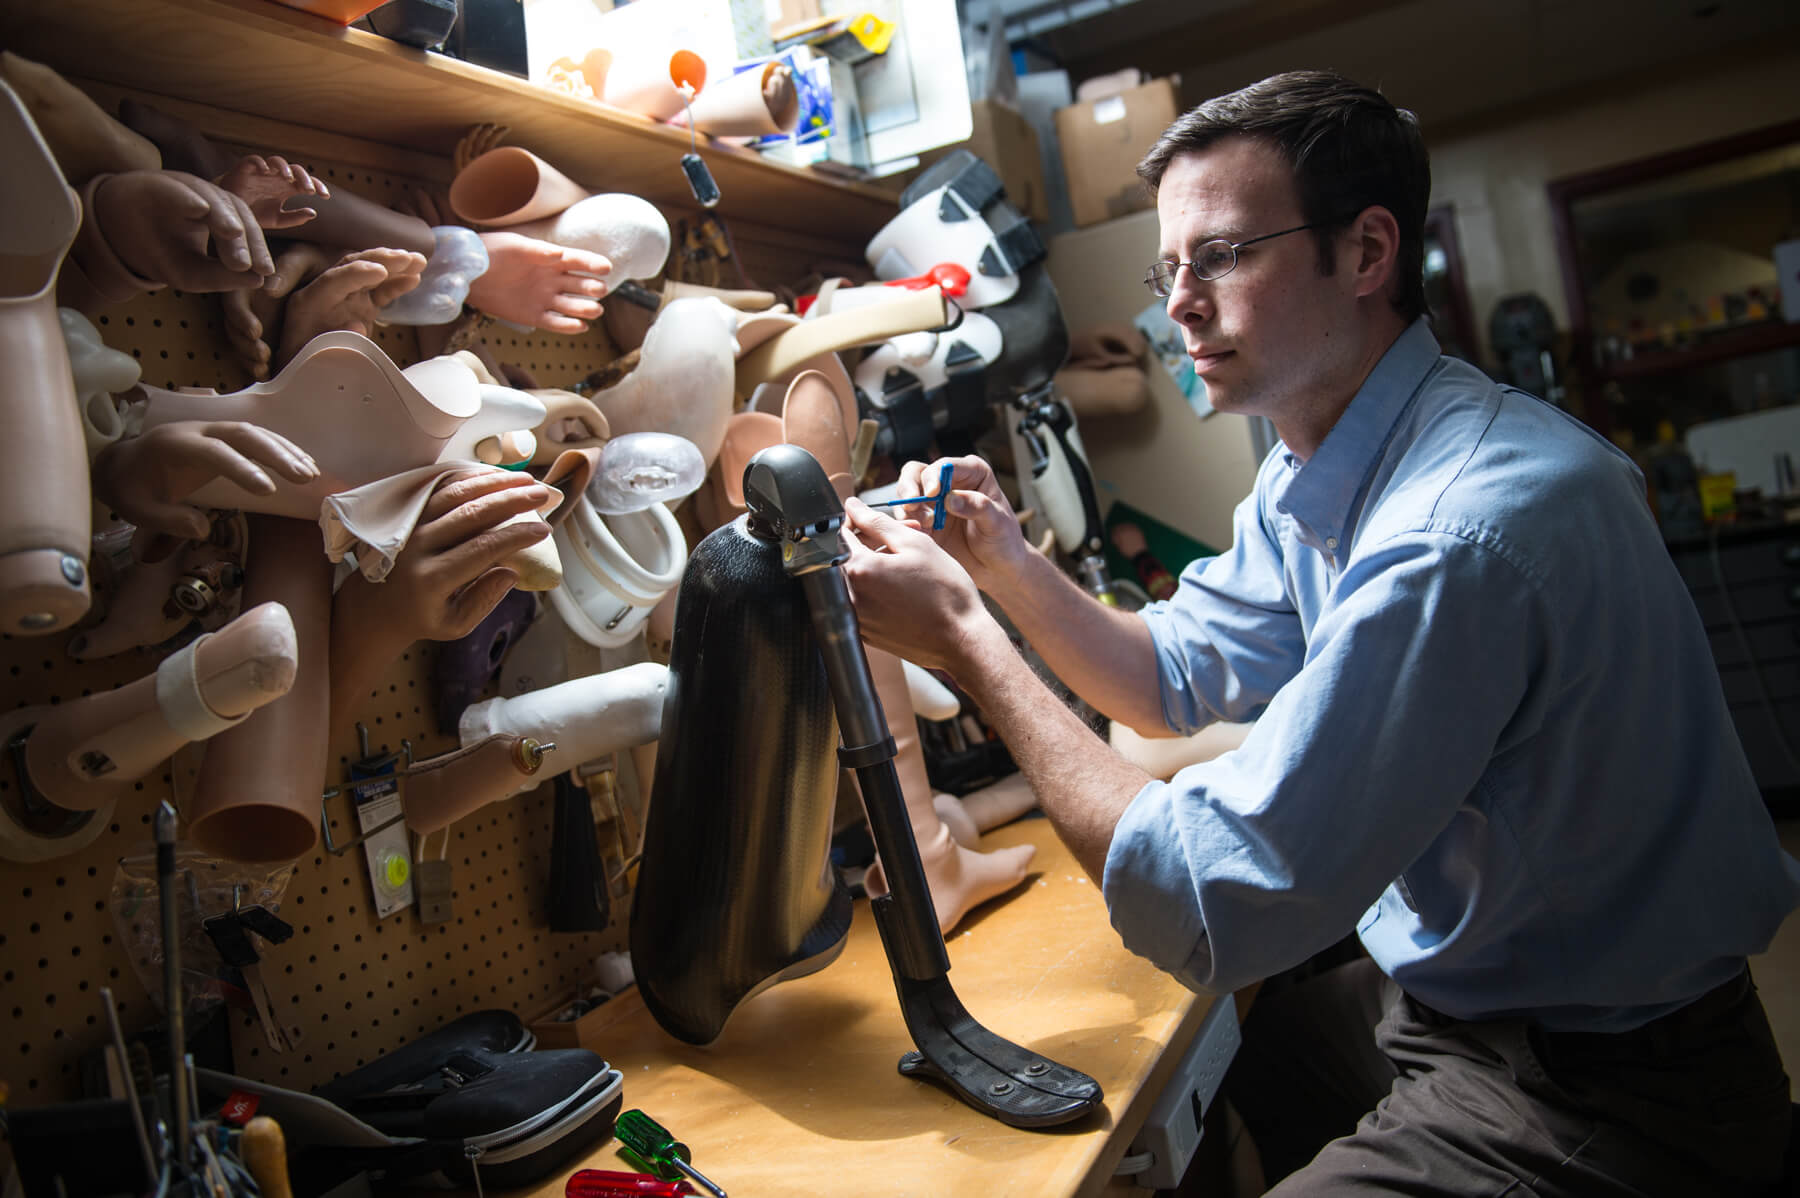 Researcher working on prosthetic limbs.